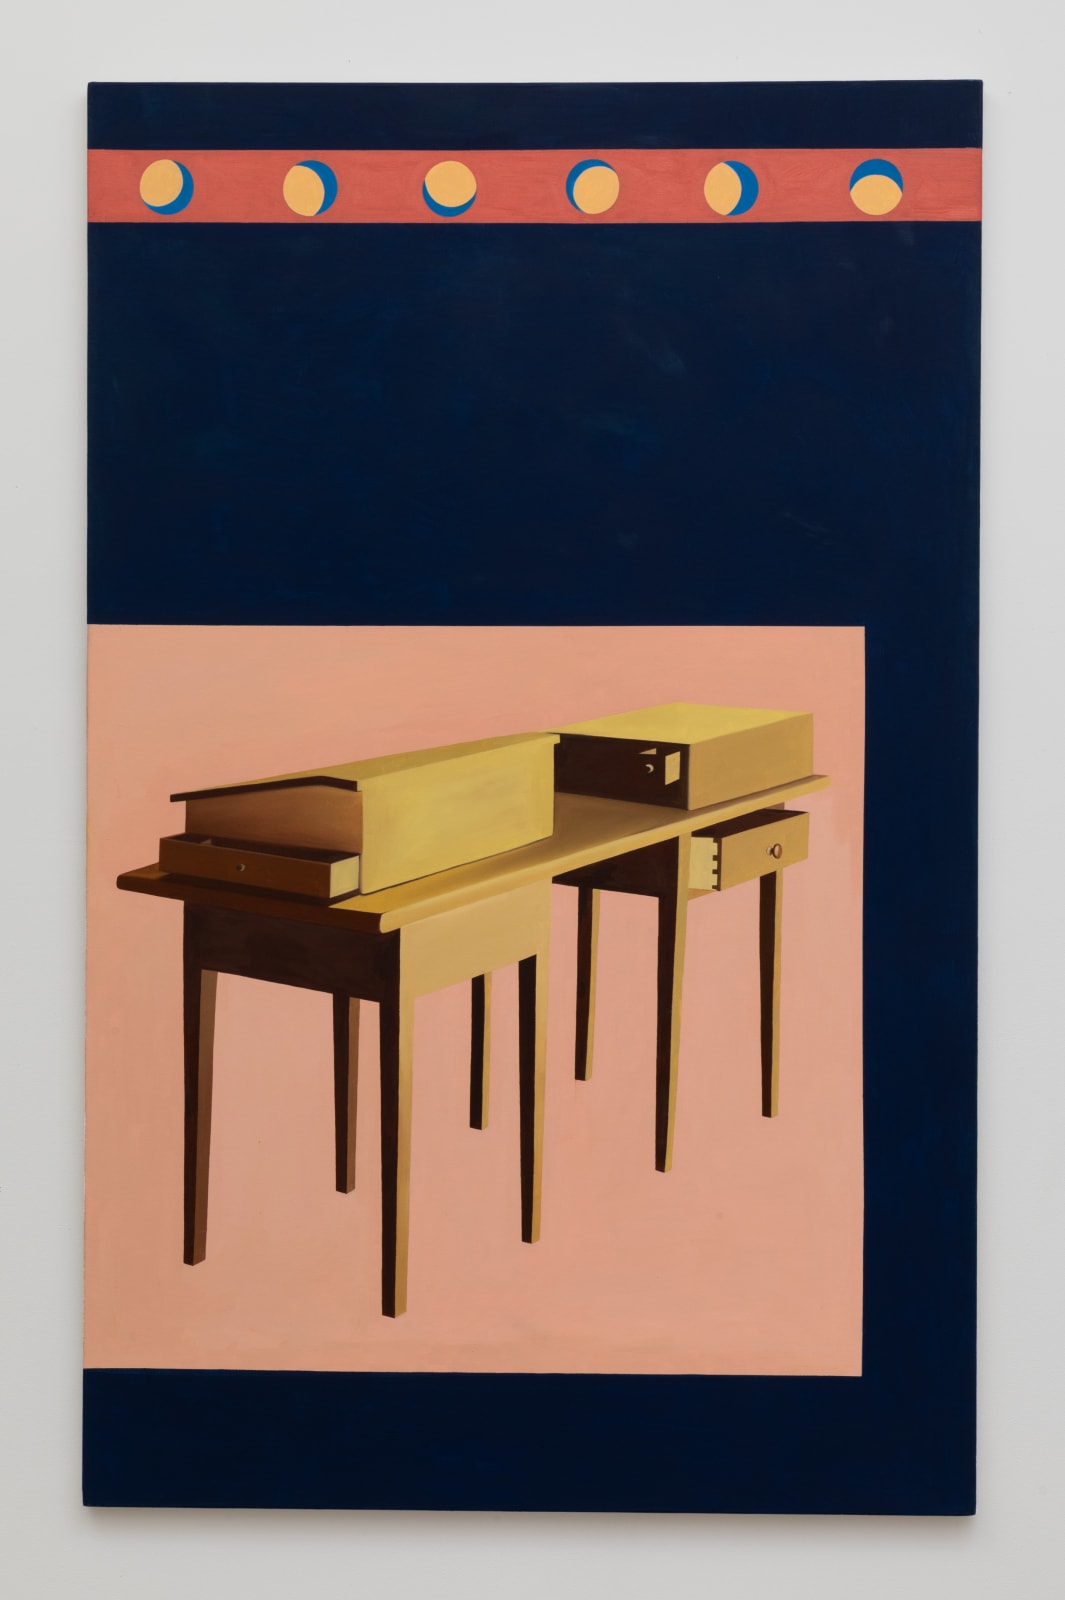 Caitlin MacBride, Transitional Objects, 2018